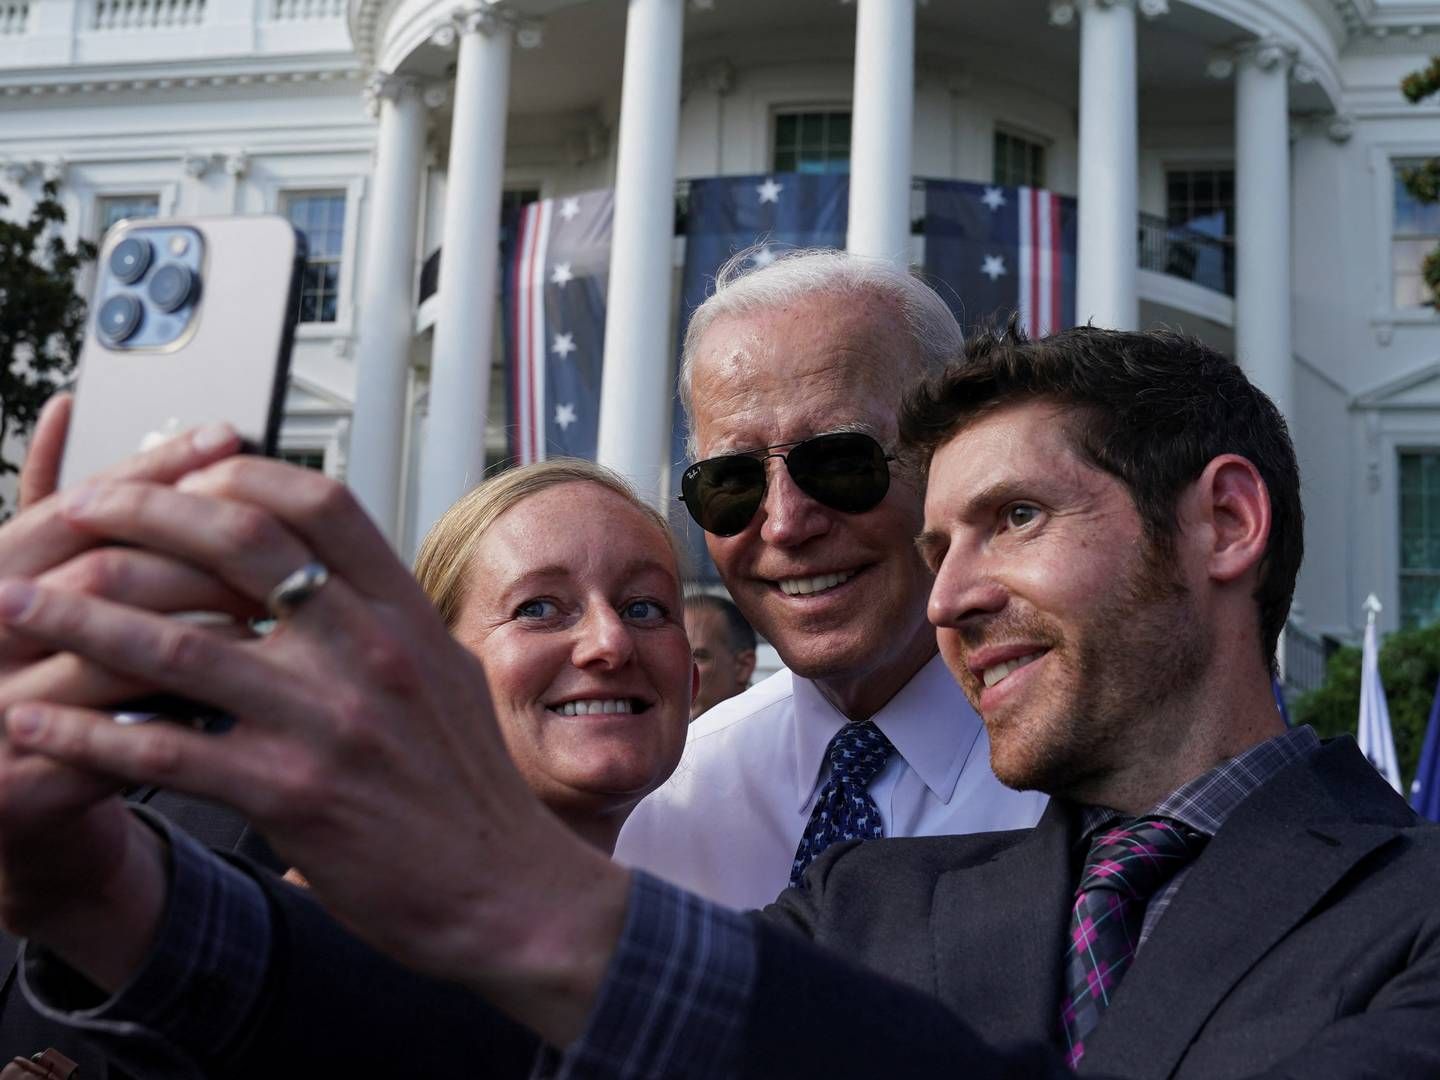 President Joe Biden poses for selfies while celebrating the passing of the Inflation Reduction Act. | Photo: Kevin Lamarque/Reuters/Ritzau Scanpix